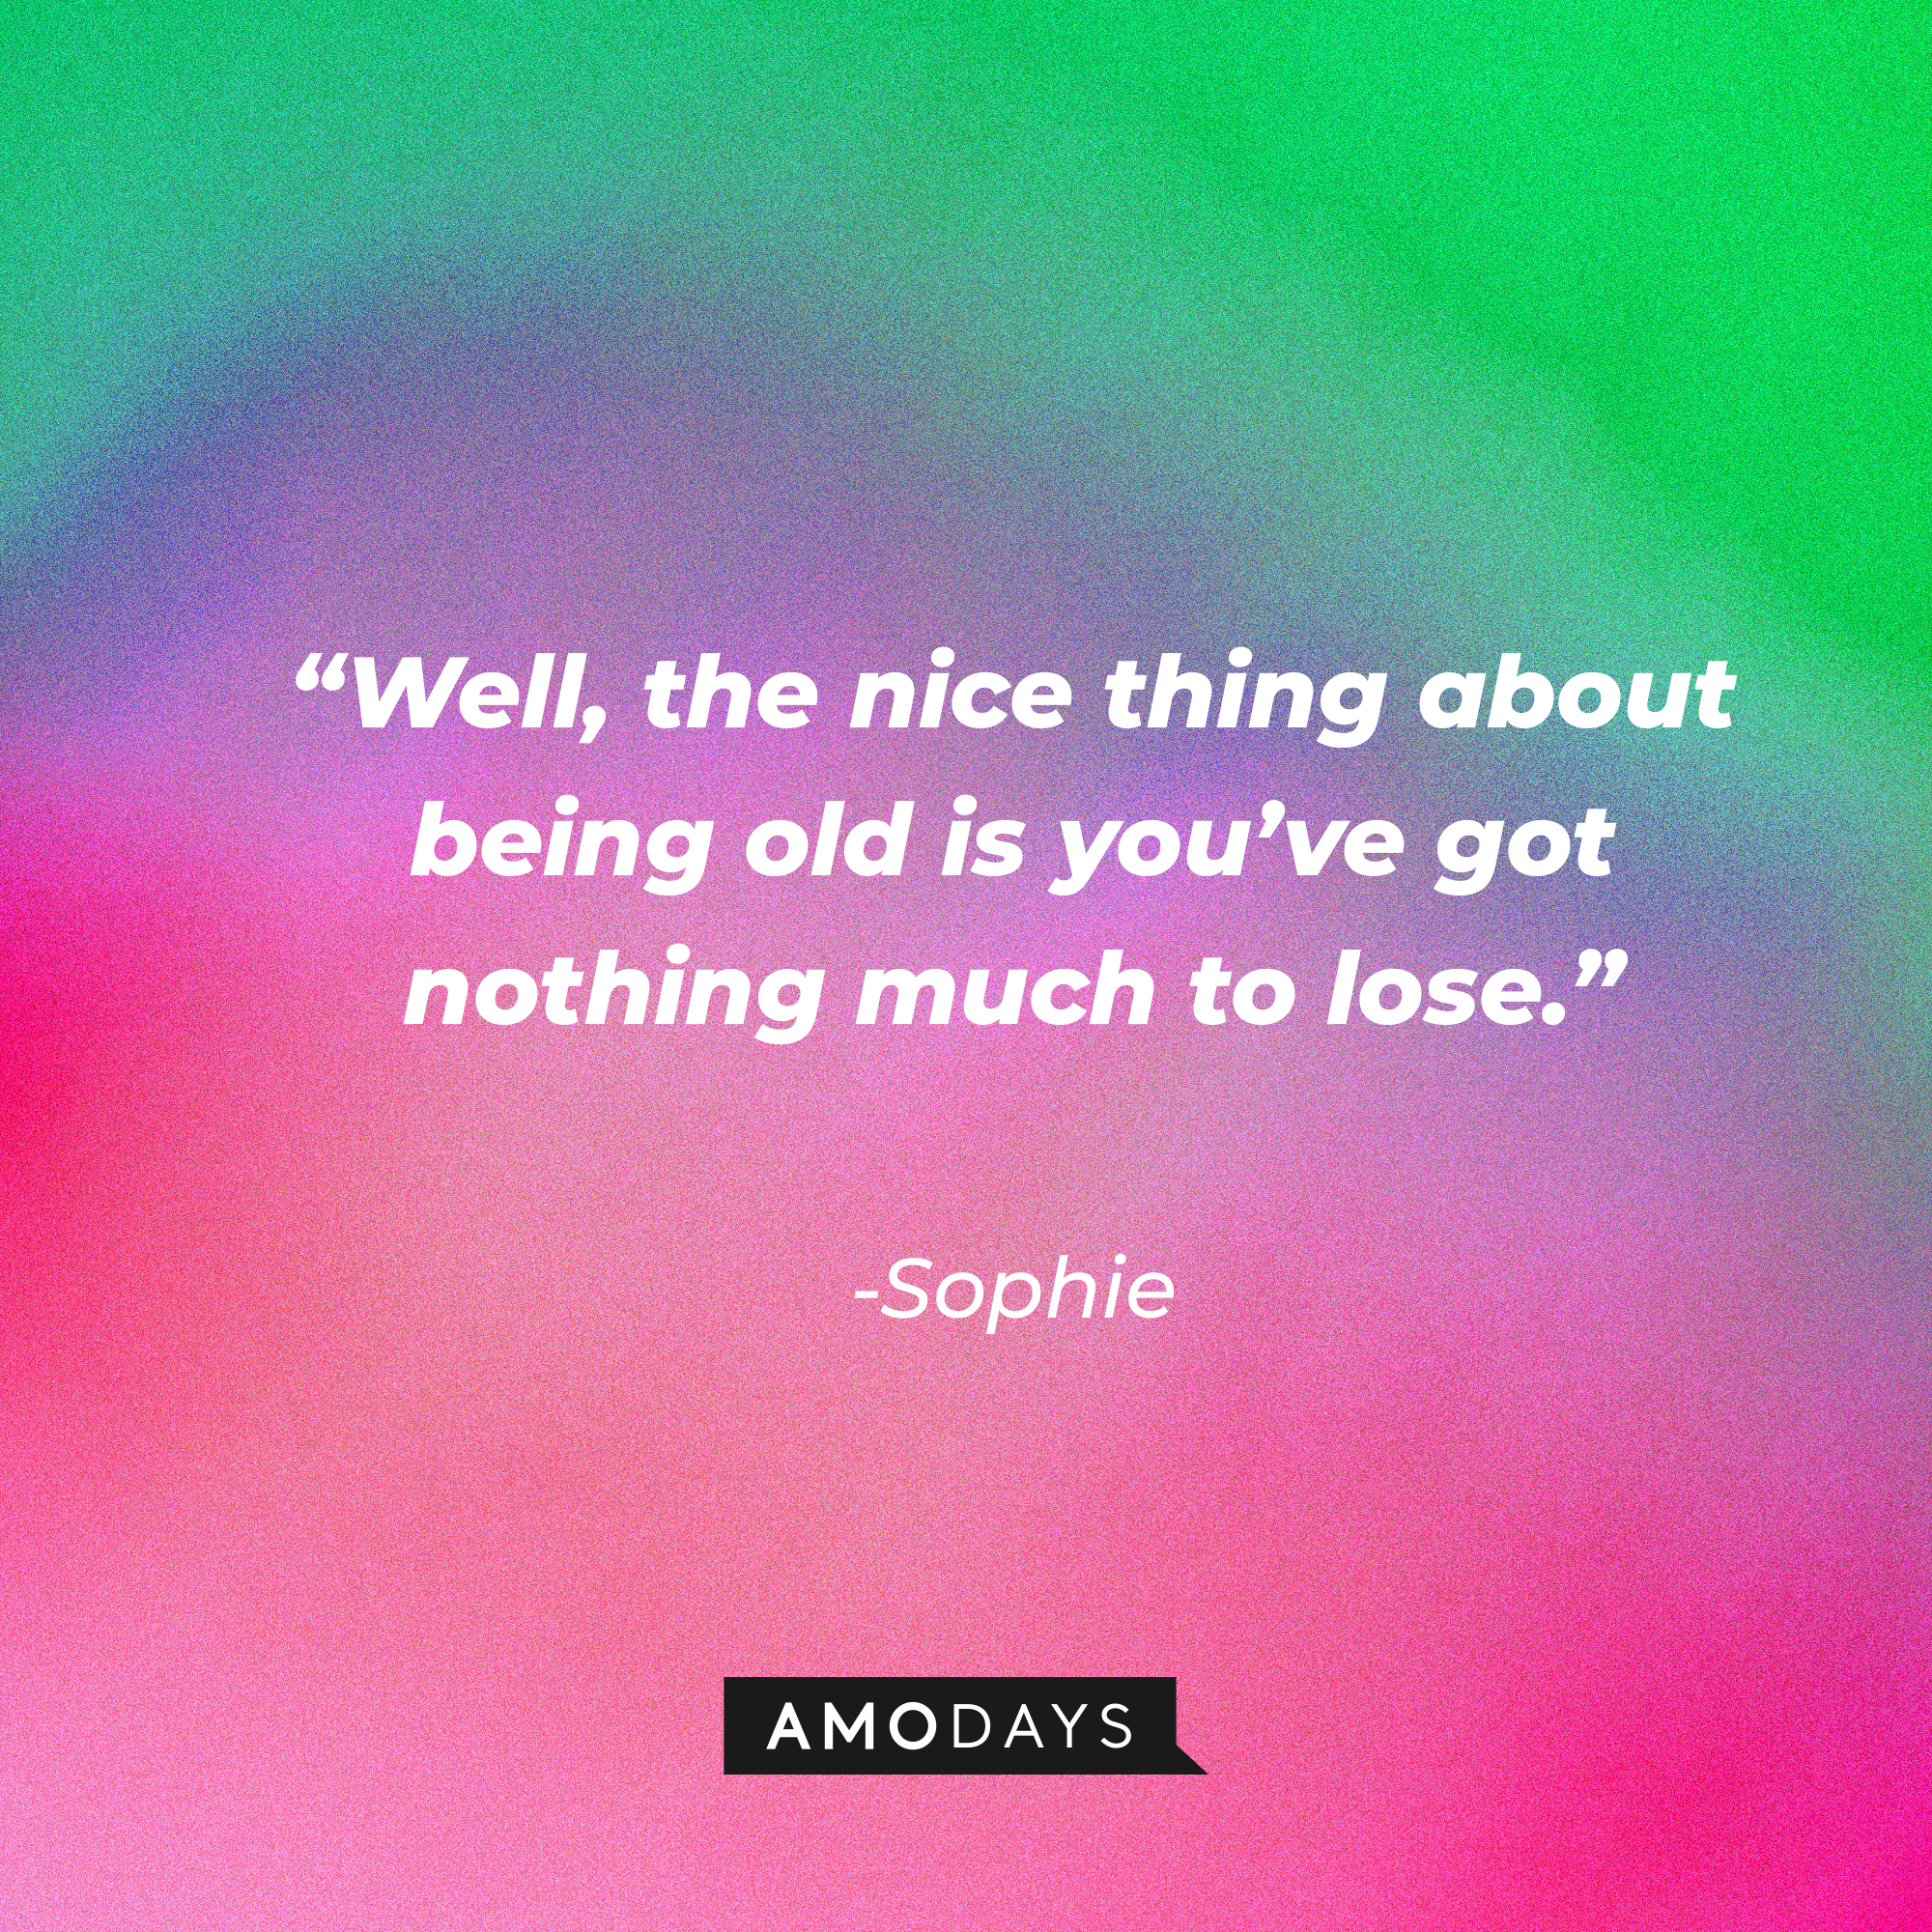 Sophie’s quote: “Well, the nice thing about being old is you’ve got nothing much to lose.” | Source: AmoDays